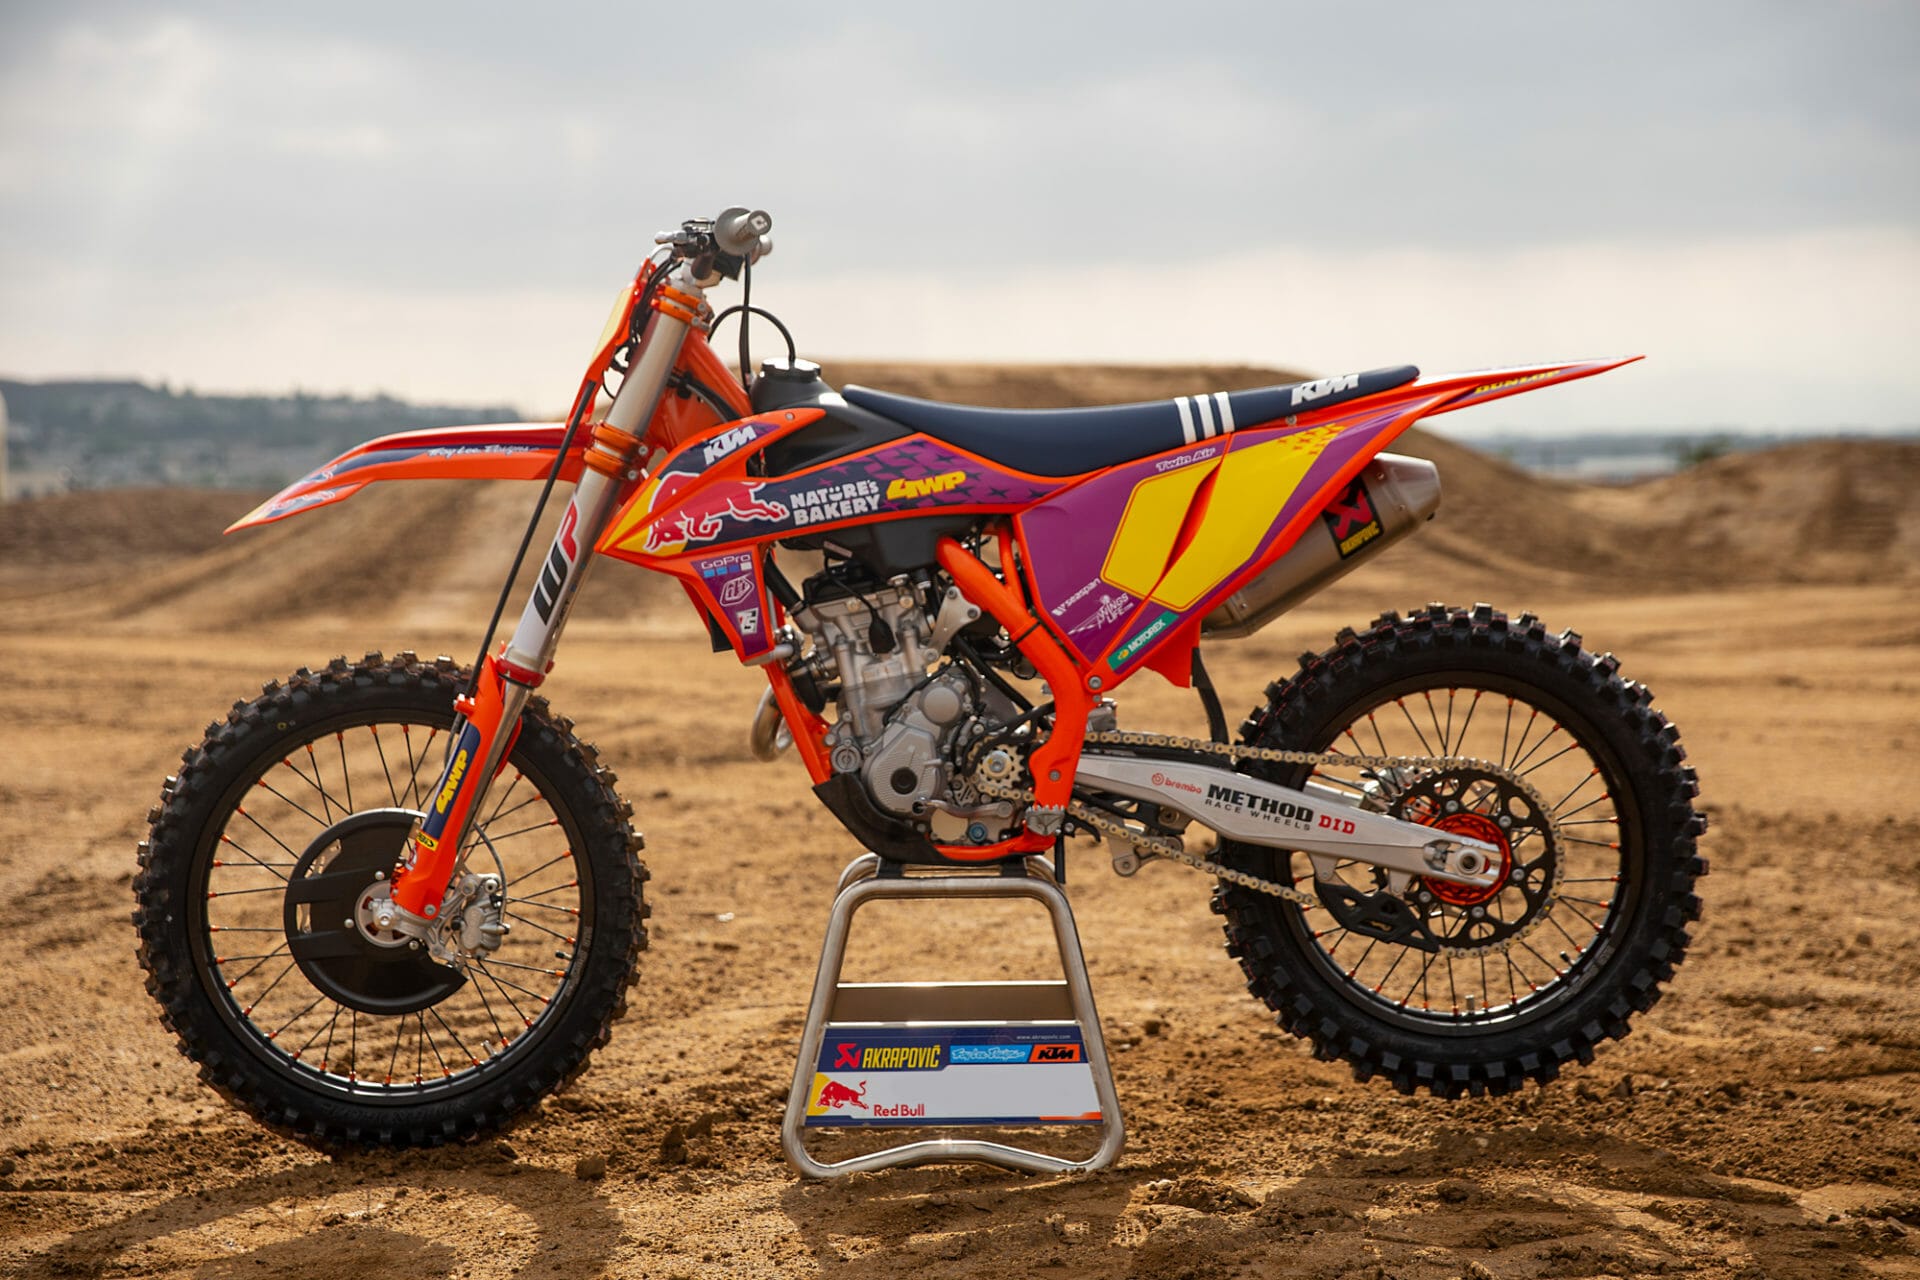 KTM 250 SX-F Troy Lee Design presented
- also in the App MOTORCYCLE NEWS